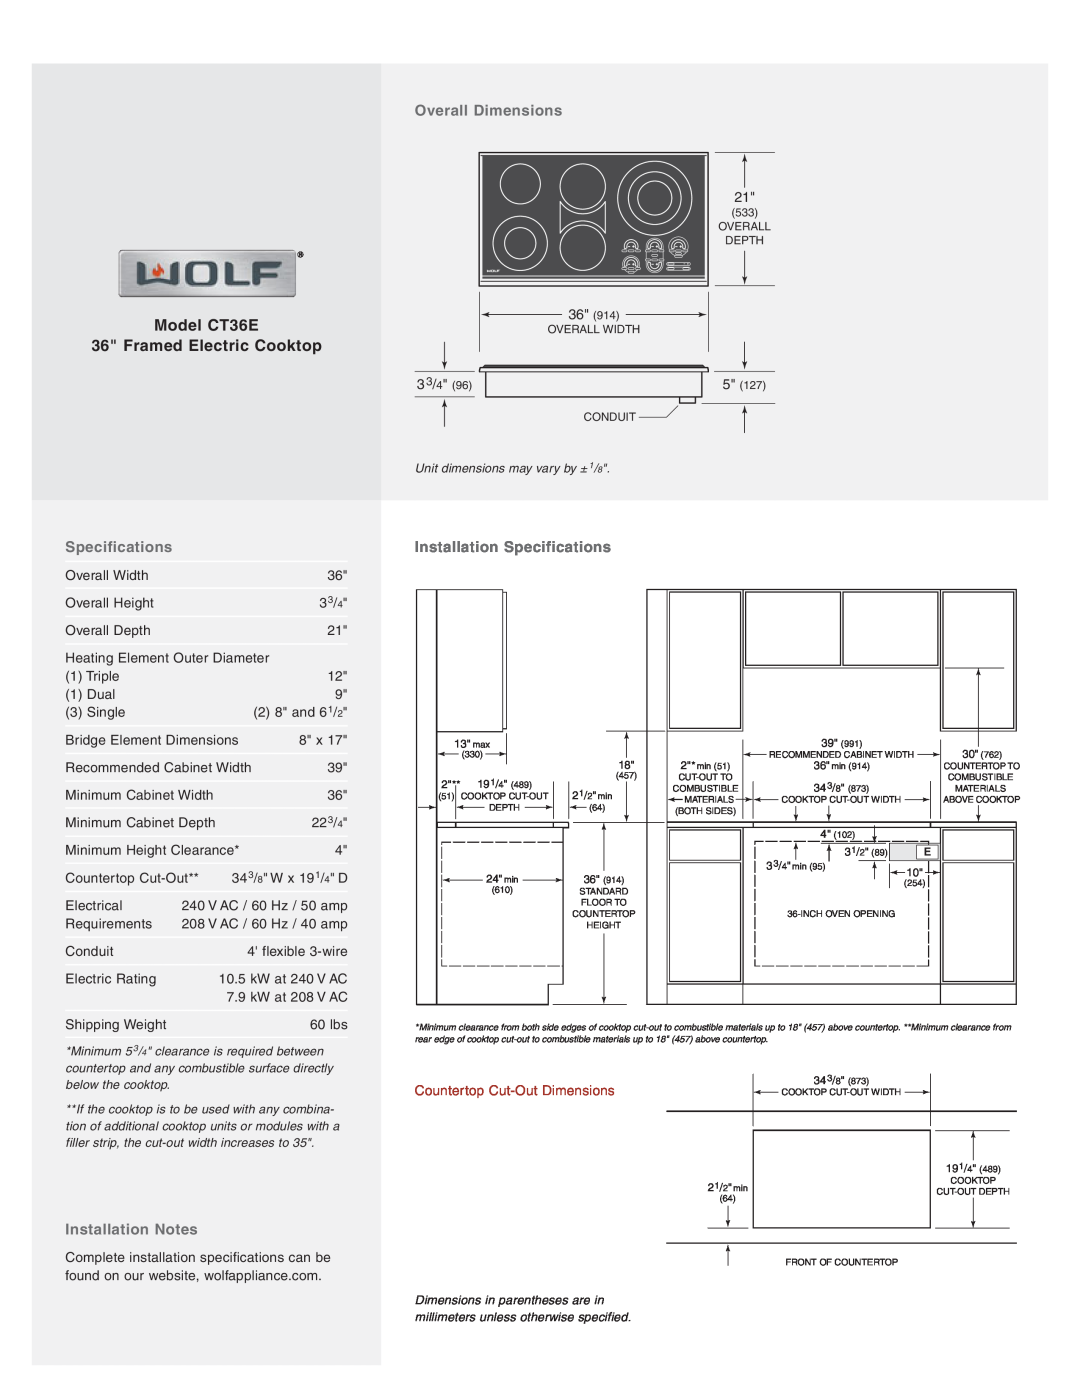 Wolf Appliance Company CT36E/P, CT36E/S, CT36E/B Overall Dimensions, Installation Specifications, Installation Notes 